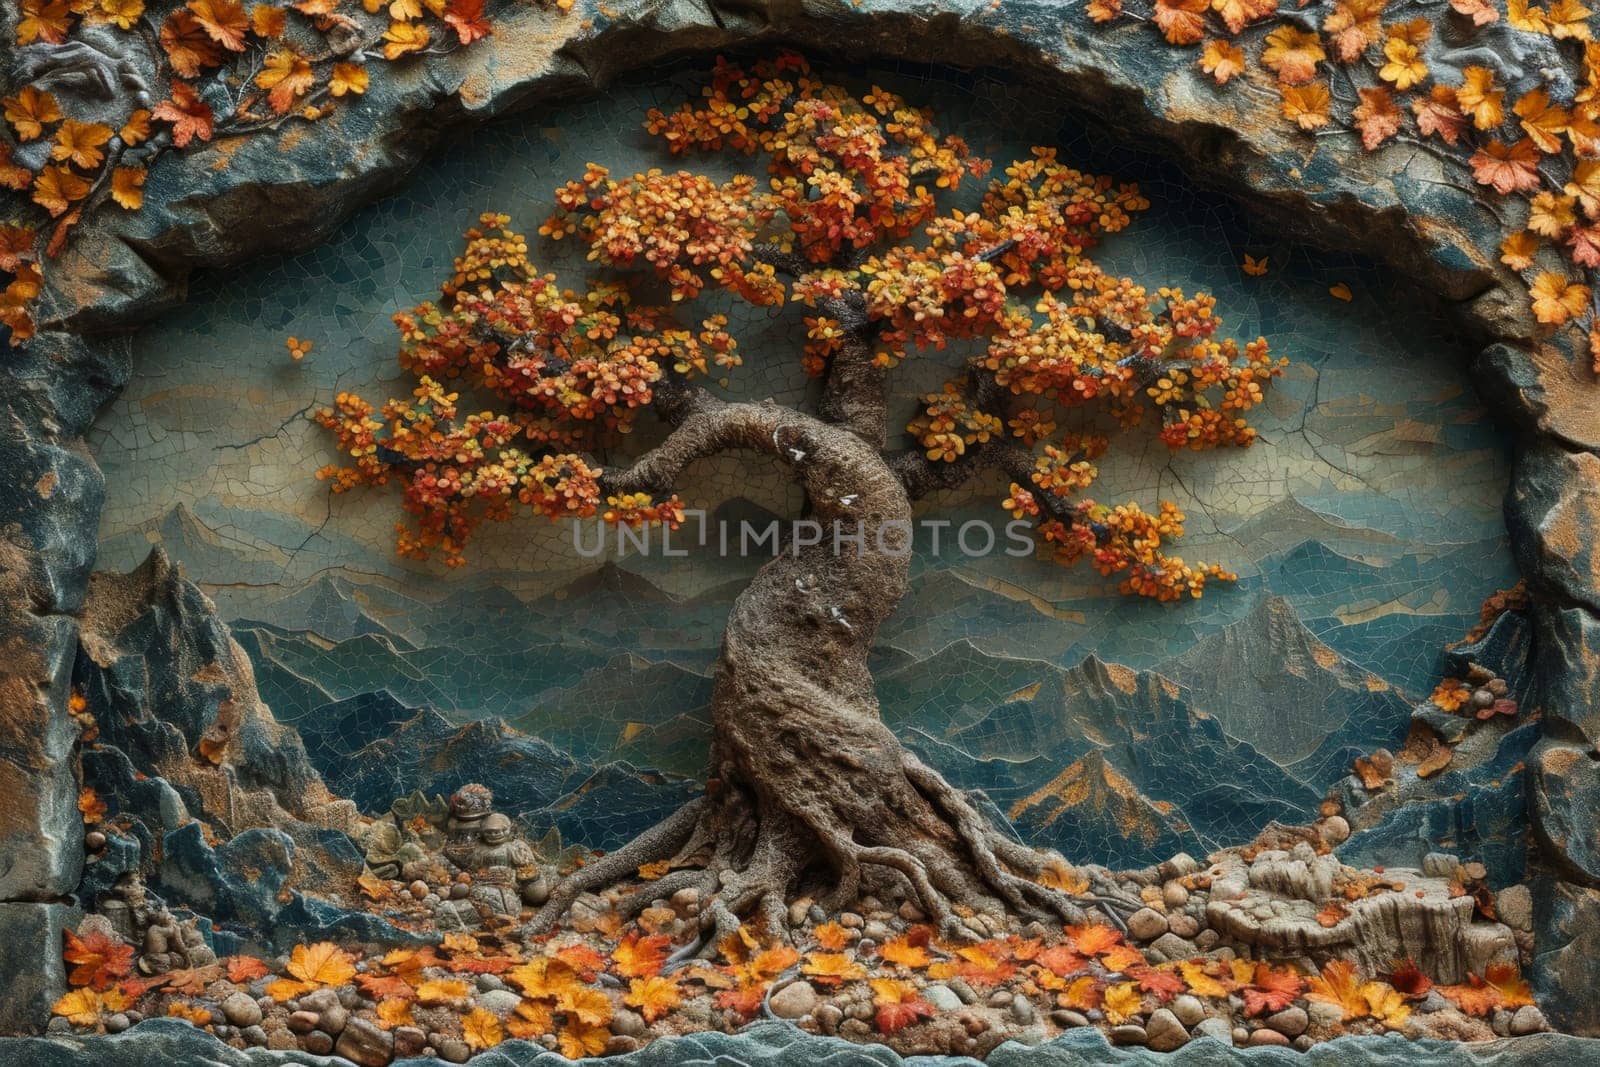 A layout of a beautiful autumn tree on the wall for your background.